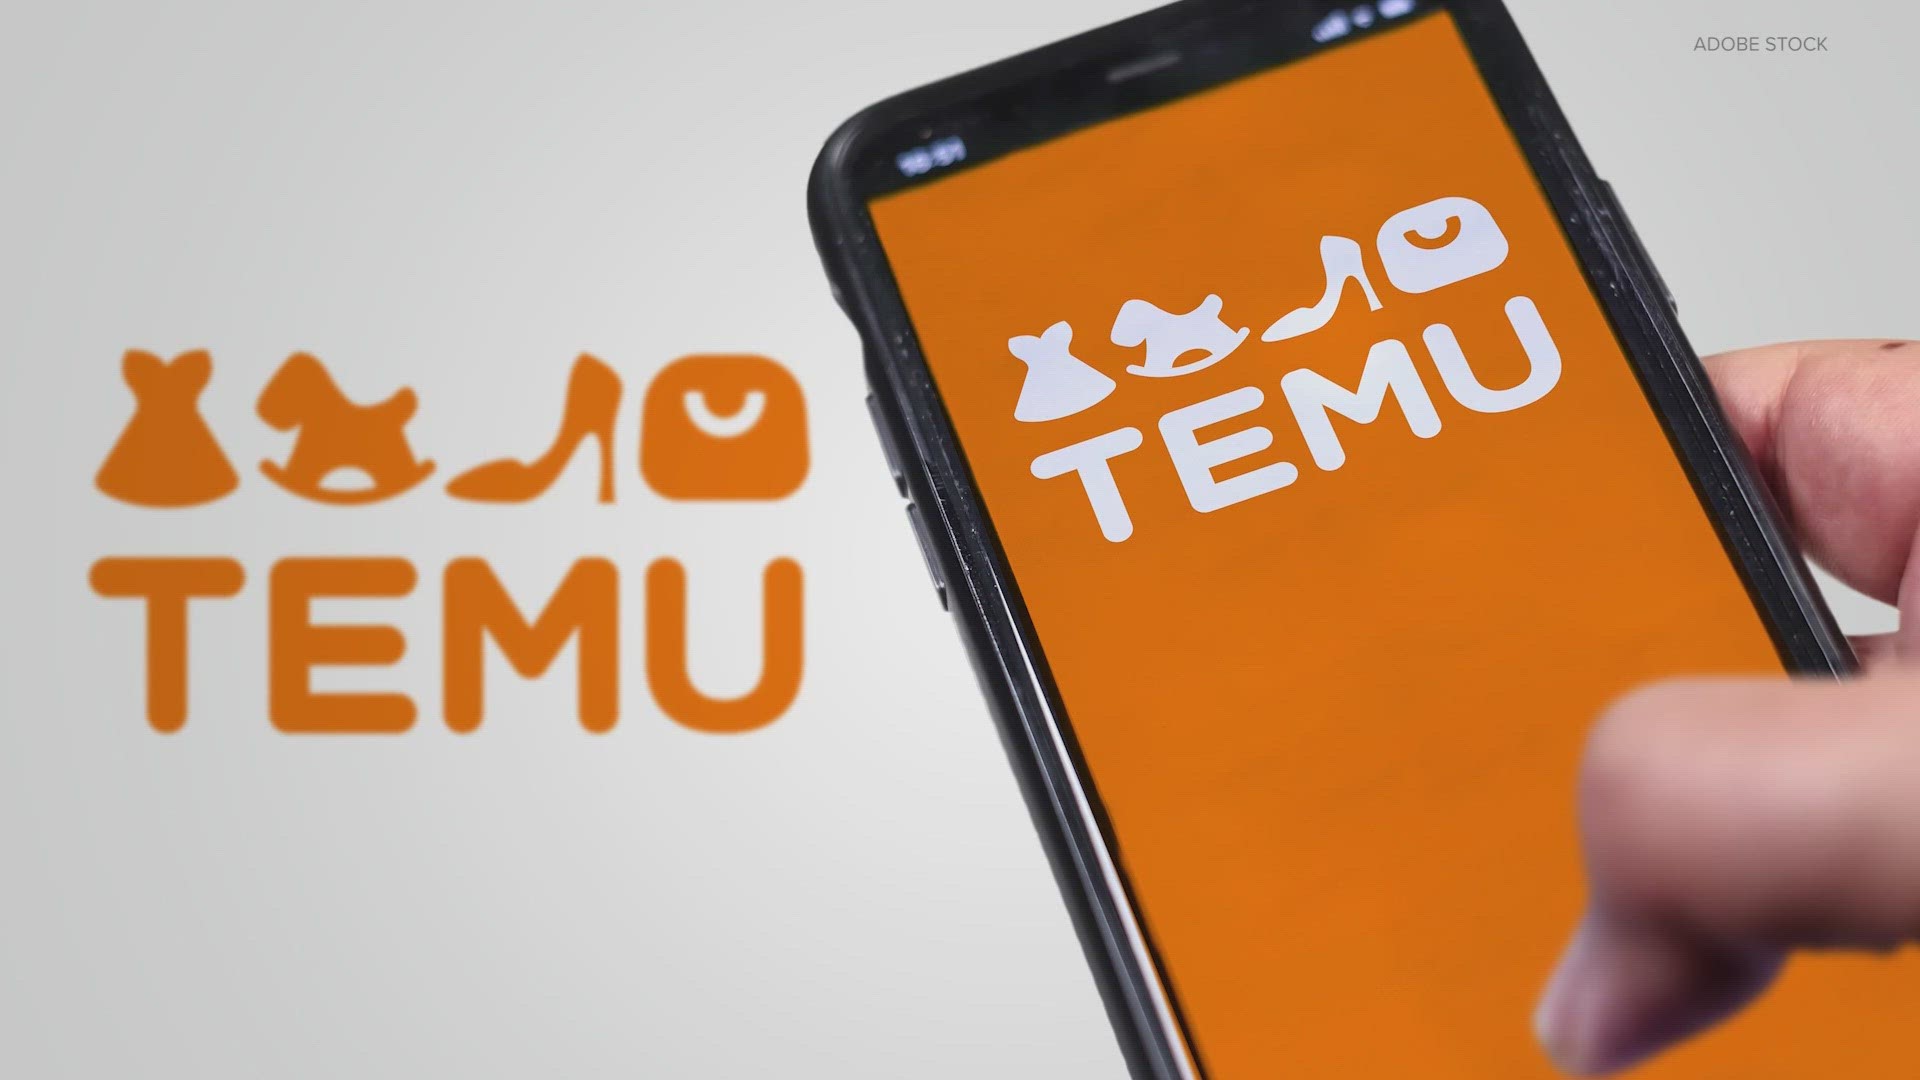 Temu is a discount online retailer with one of the most popular mobile apps. But posts online say people should avoid using the store. Here’s what we can VERIFY.